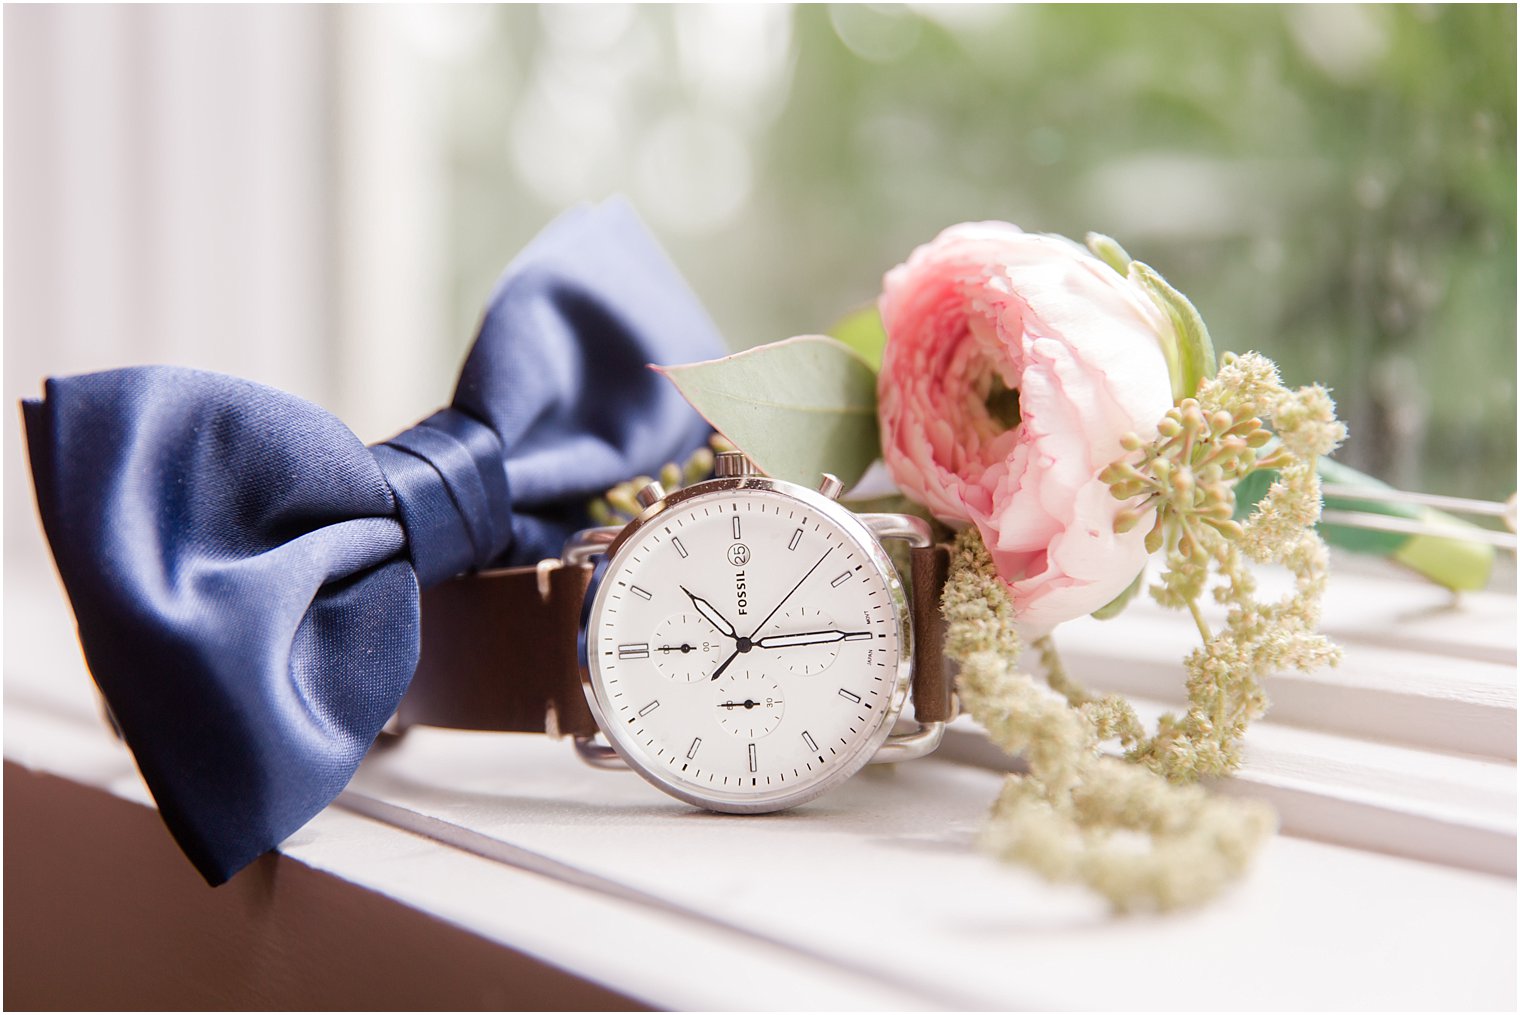 Fossil watch for groom with navy tie and pink peony boutonnière by Peonies to Paintchips